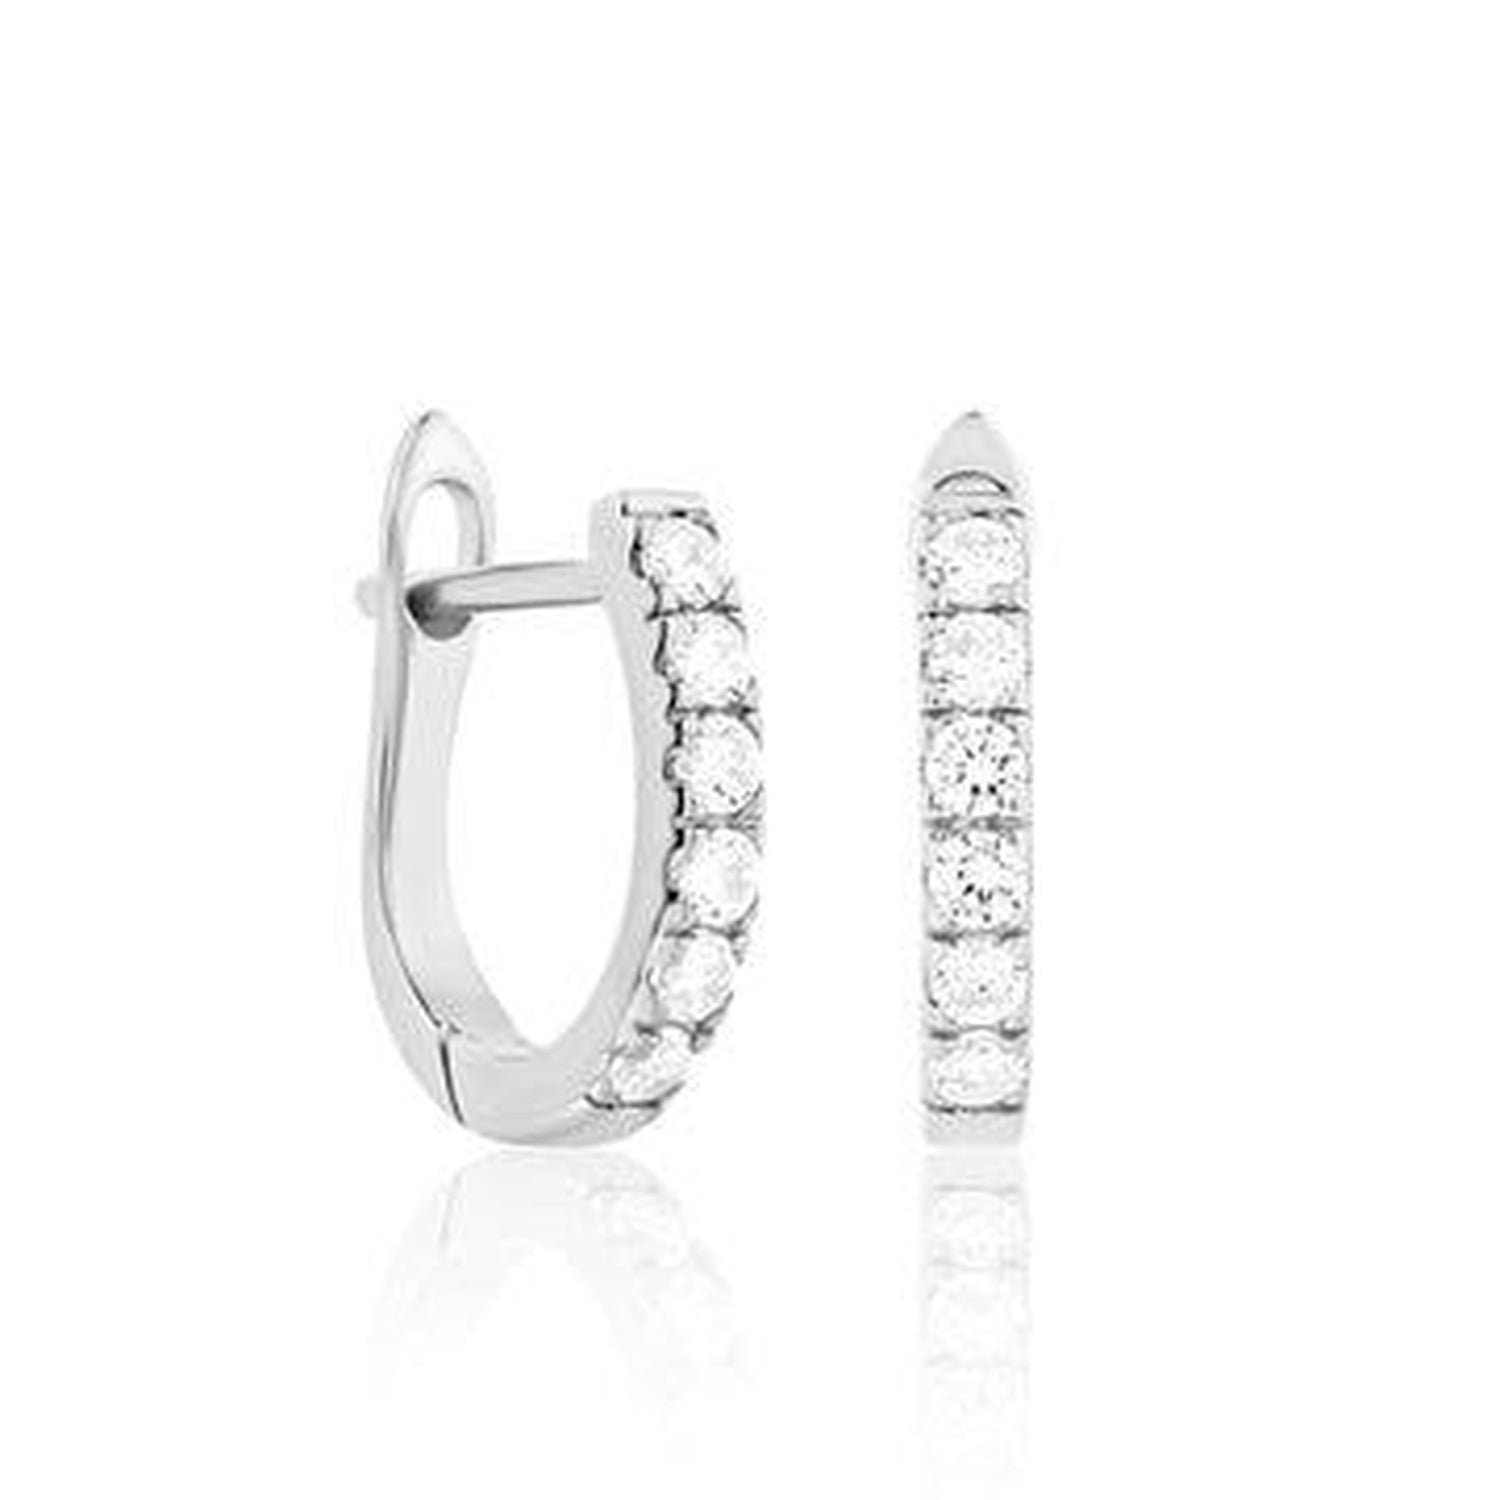 The Gold and Silver Leverback Hoops